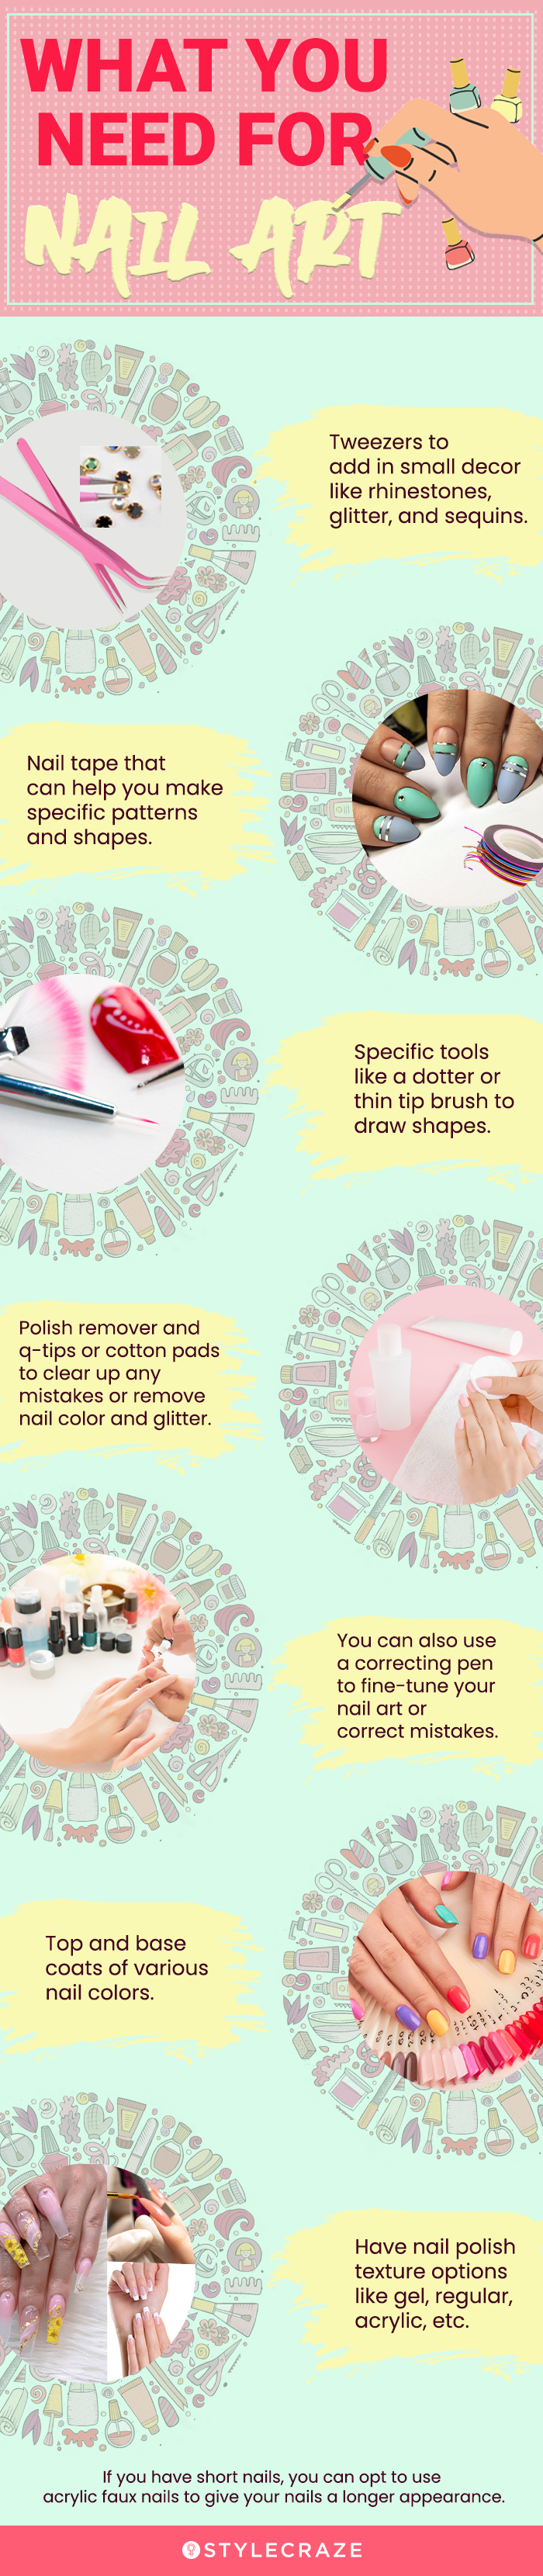 what you need for nail art (infographic)